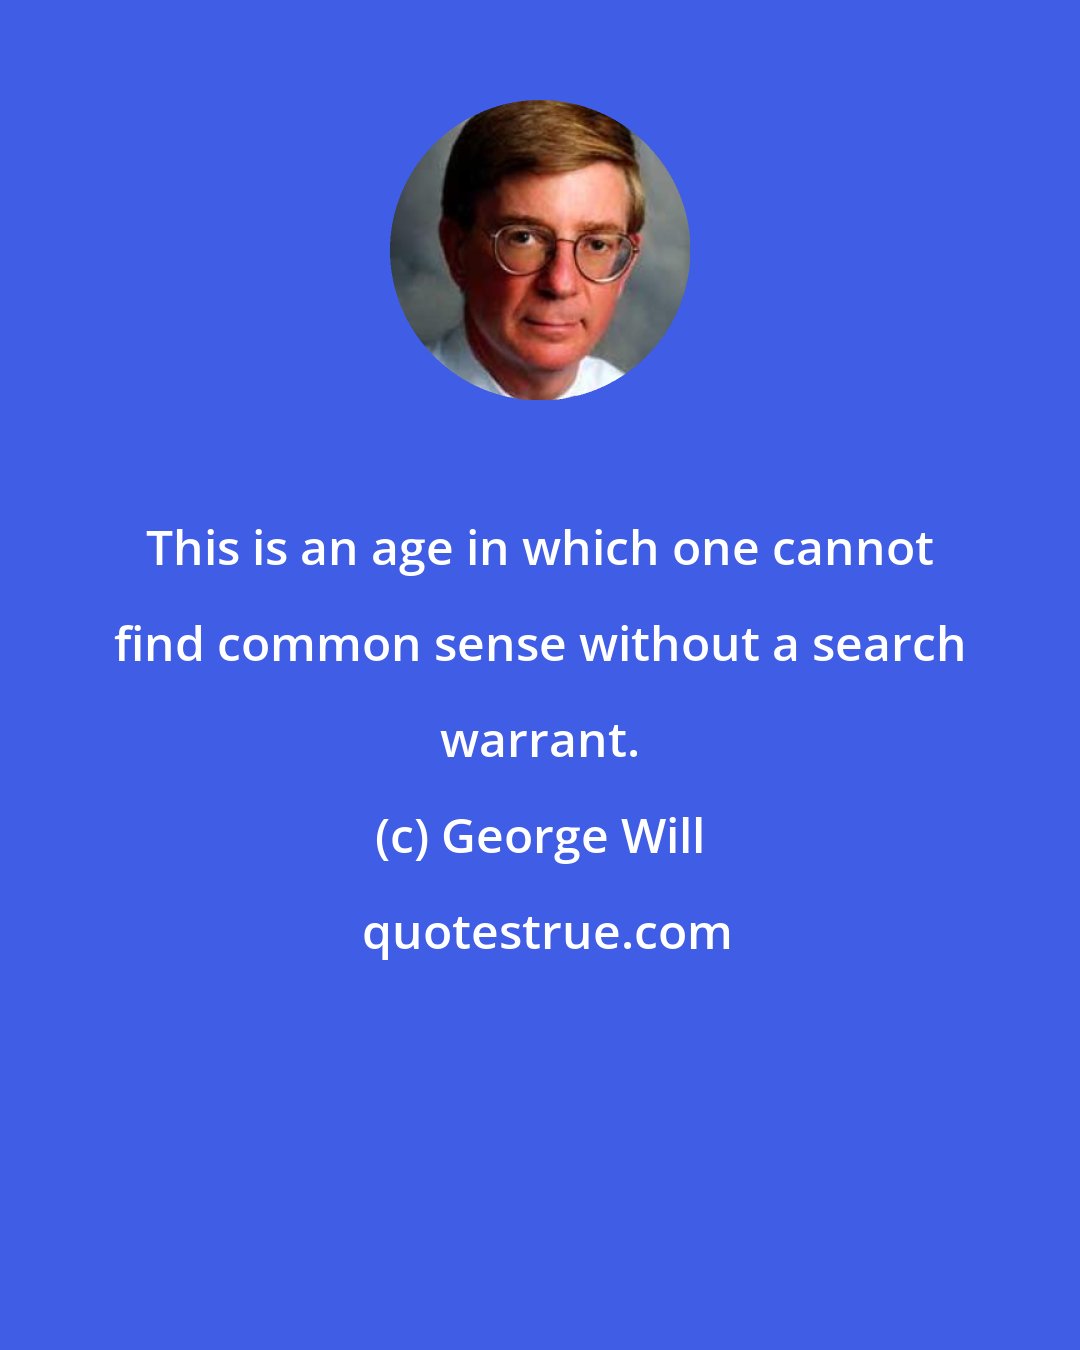 George Will: This is an age in which one cannot find common sense without a search warrant.